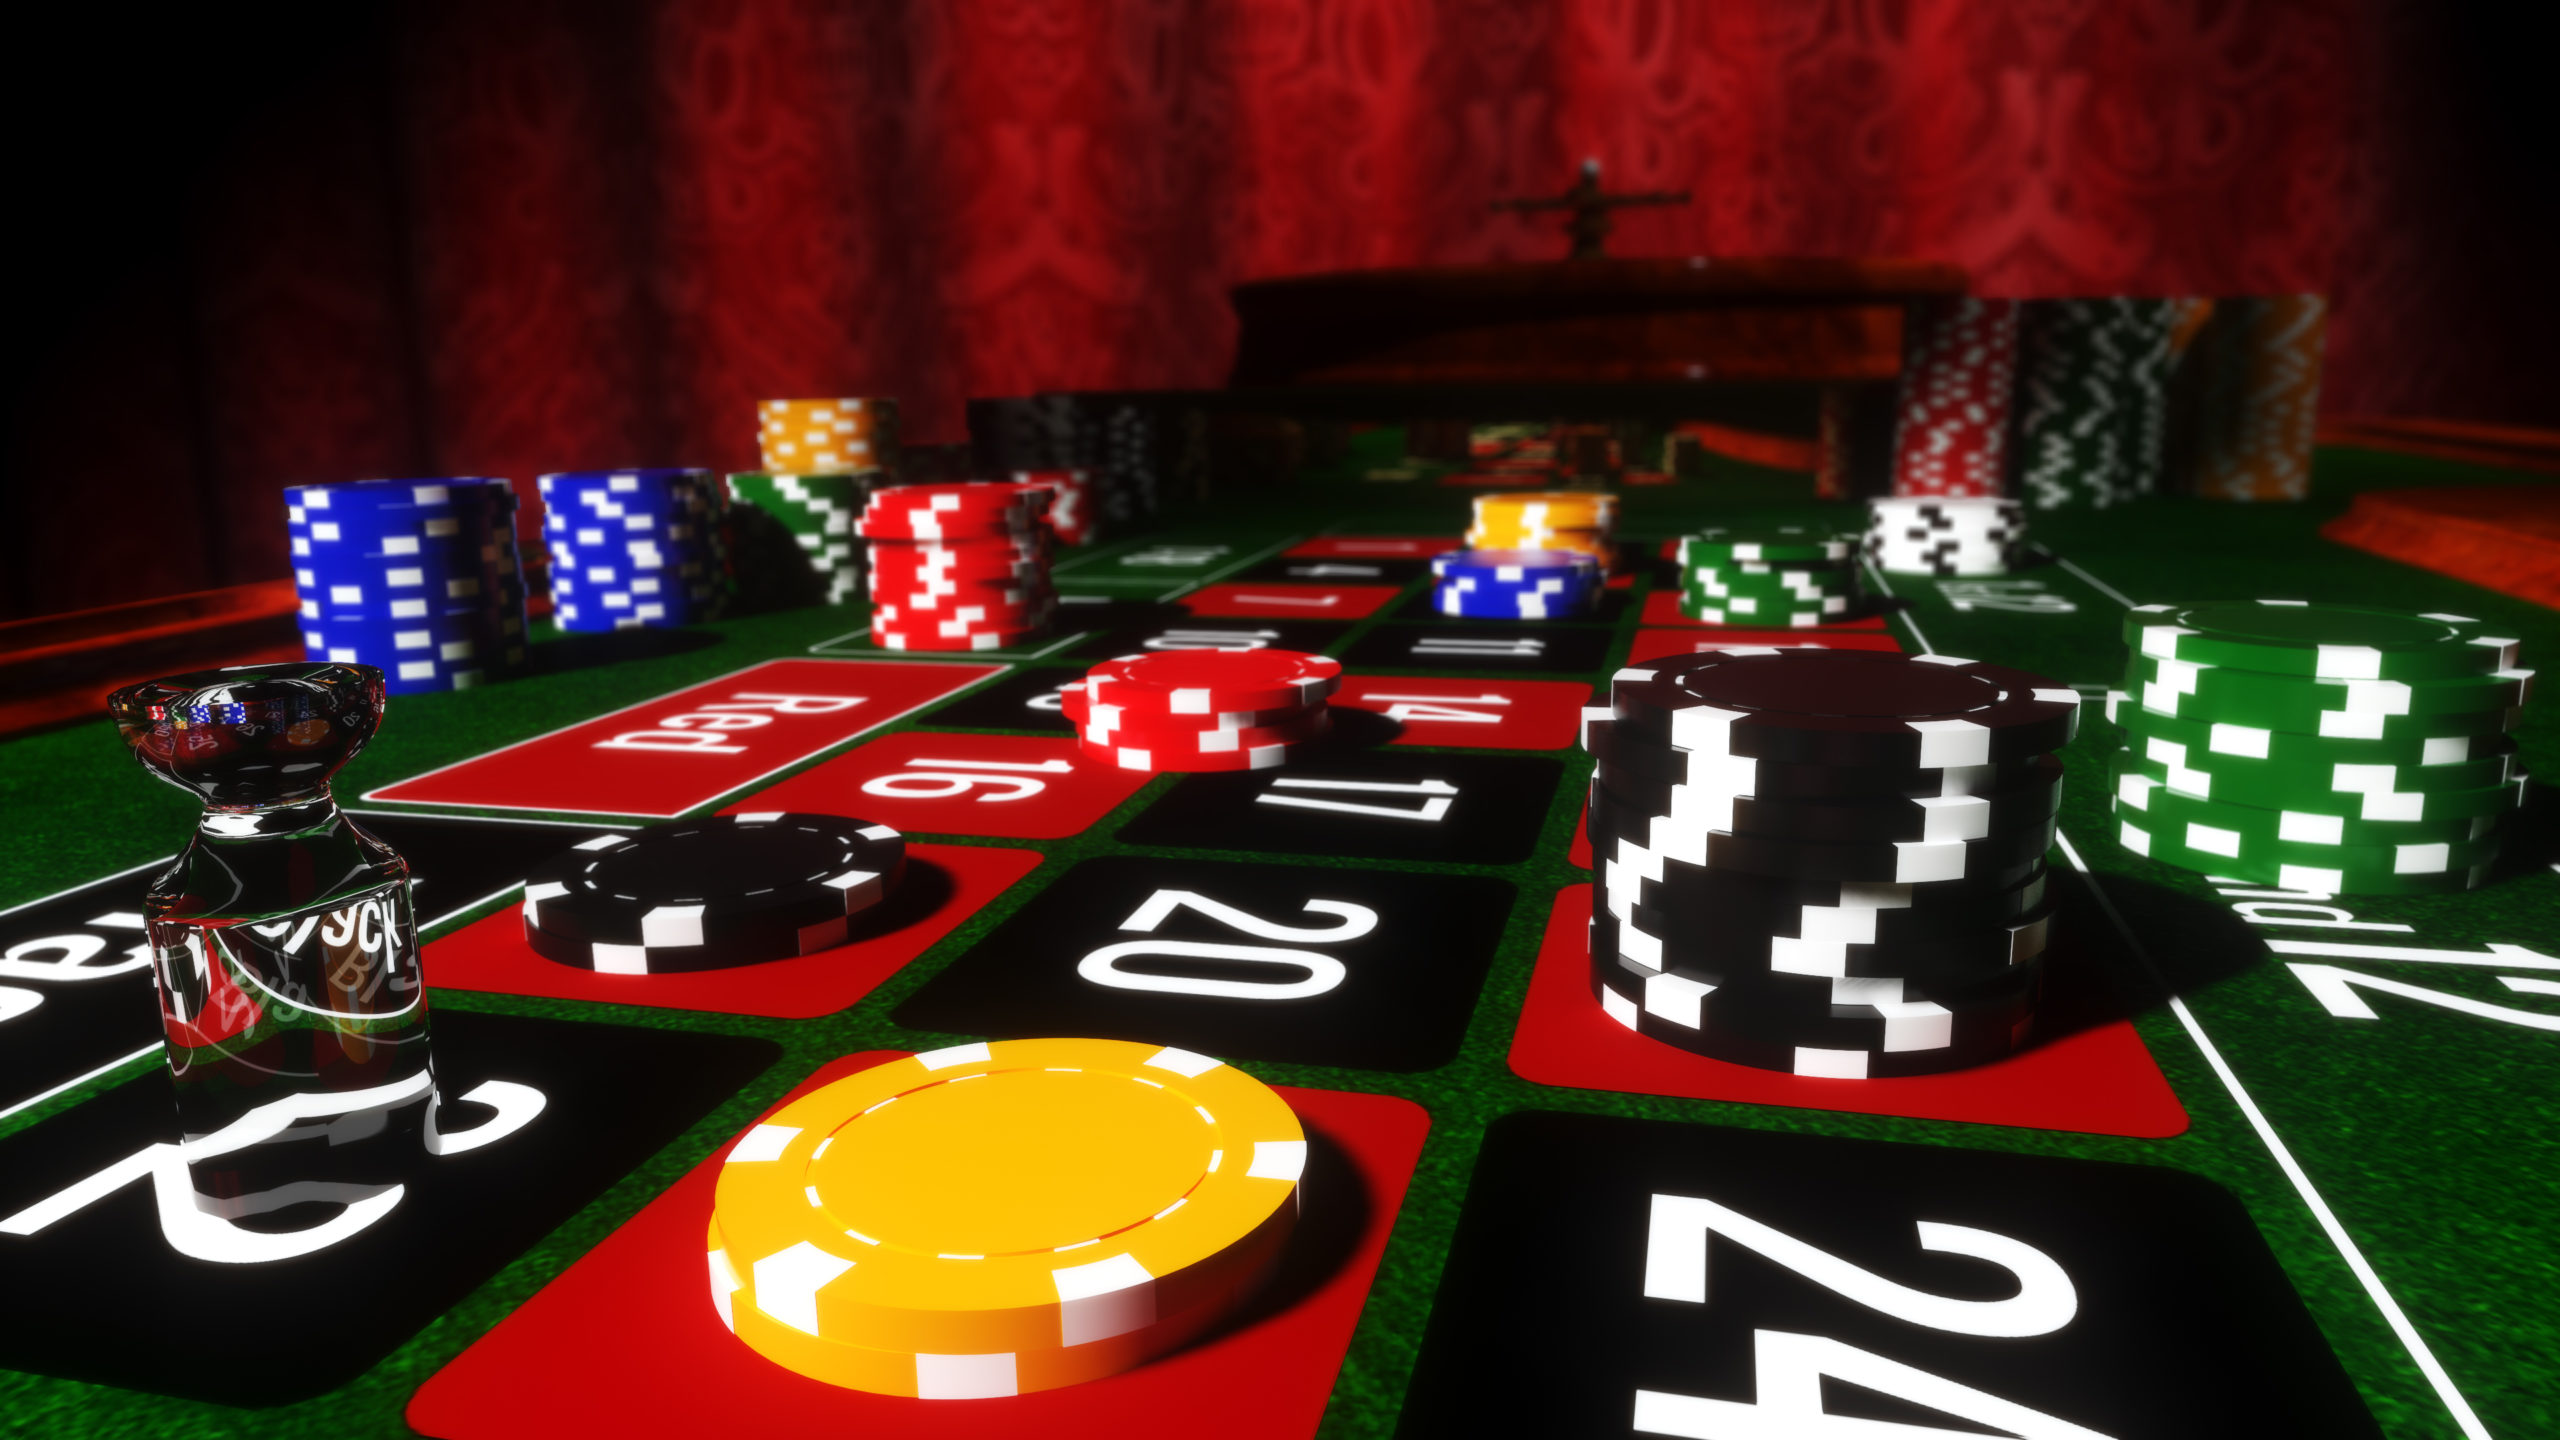 Acquire the necessary information to enter a secure casino through the Toto site casino site